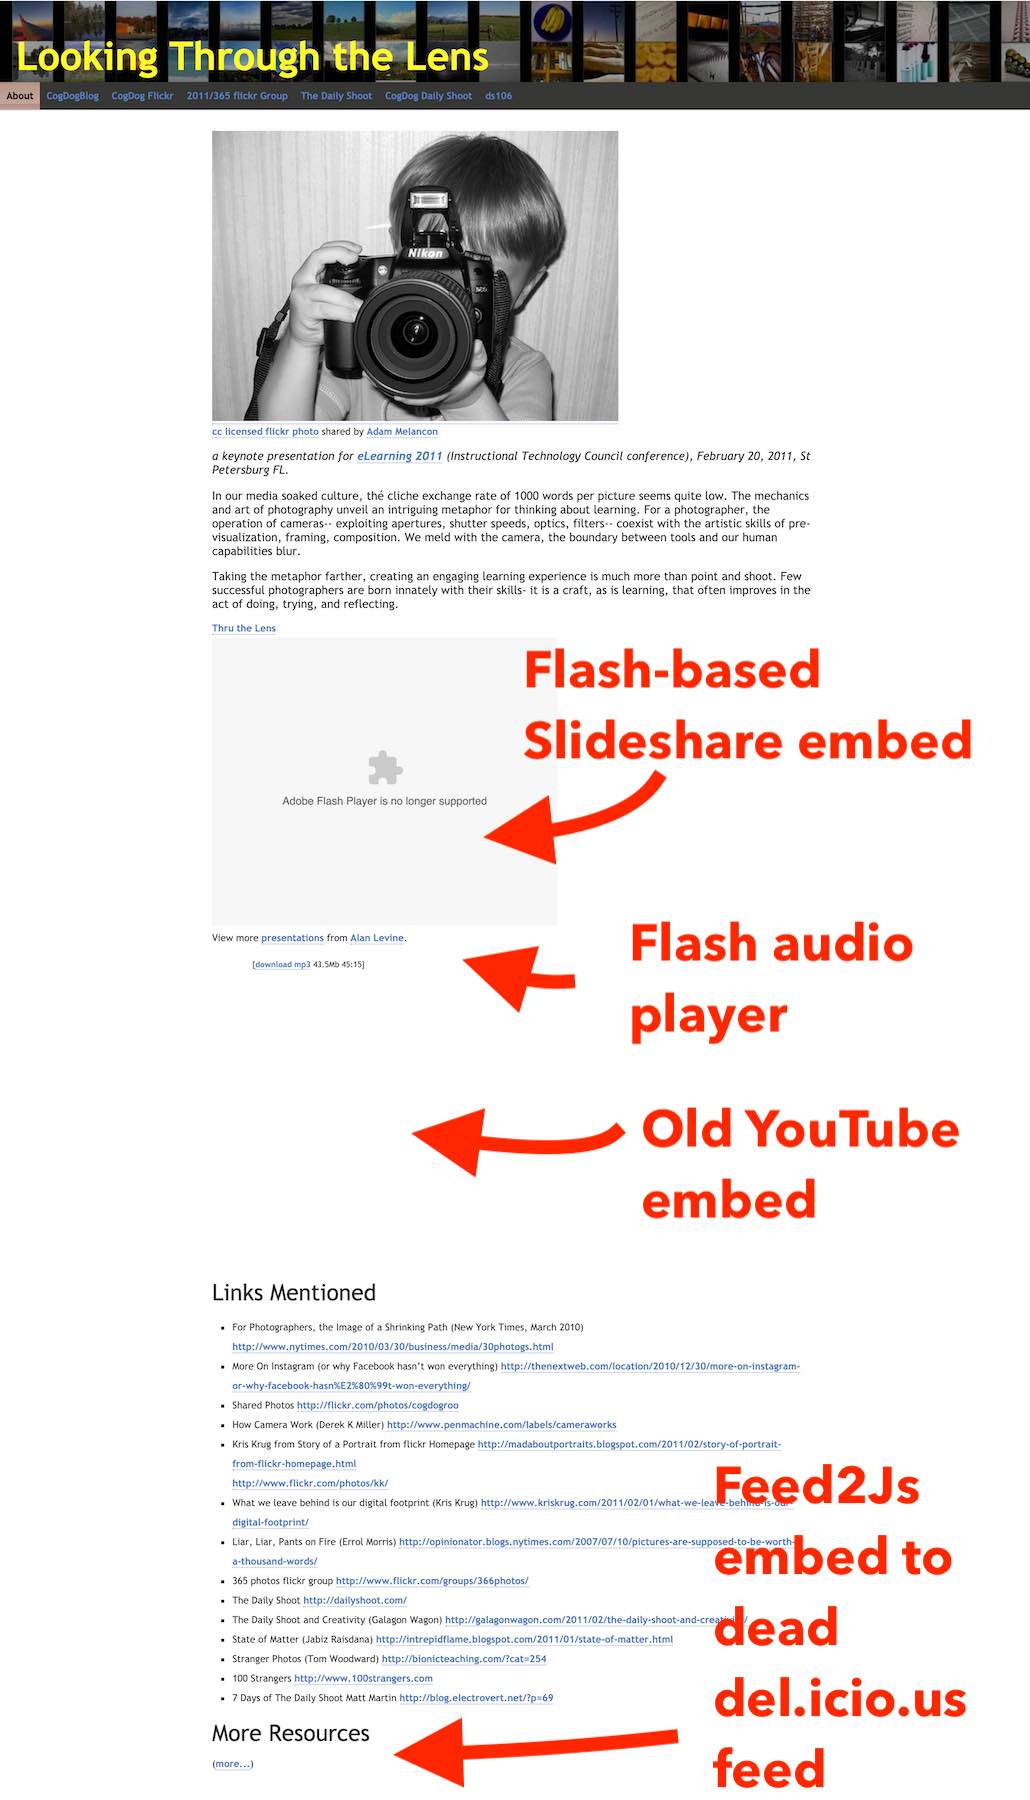 Screen shot of web page with red text marking blank areas of no content for Flash-based slideshare embed, flash audio player, old YouTube embed, and Feed2JS embed to dead del,icio,us feed